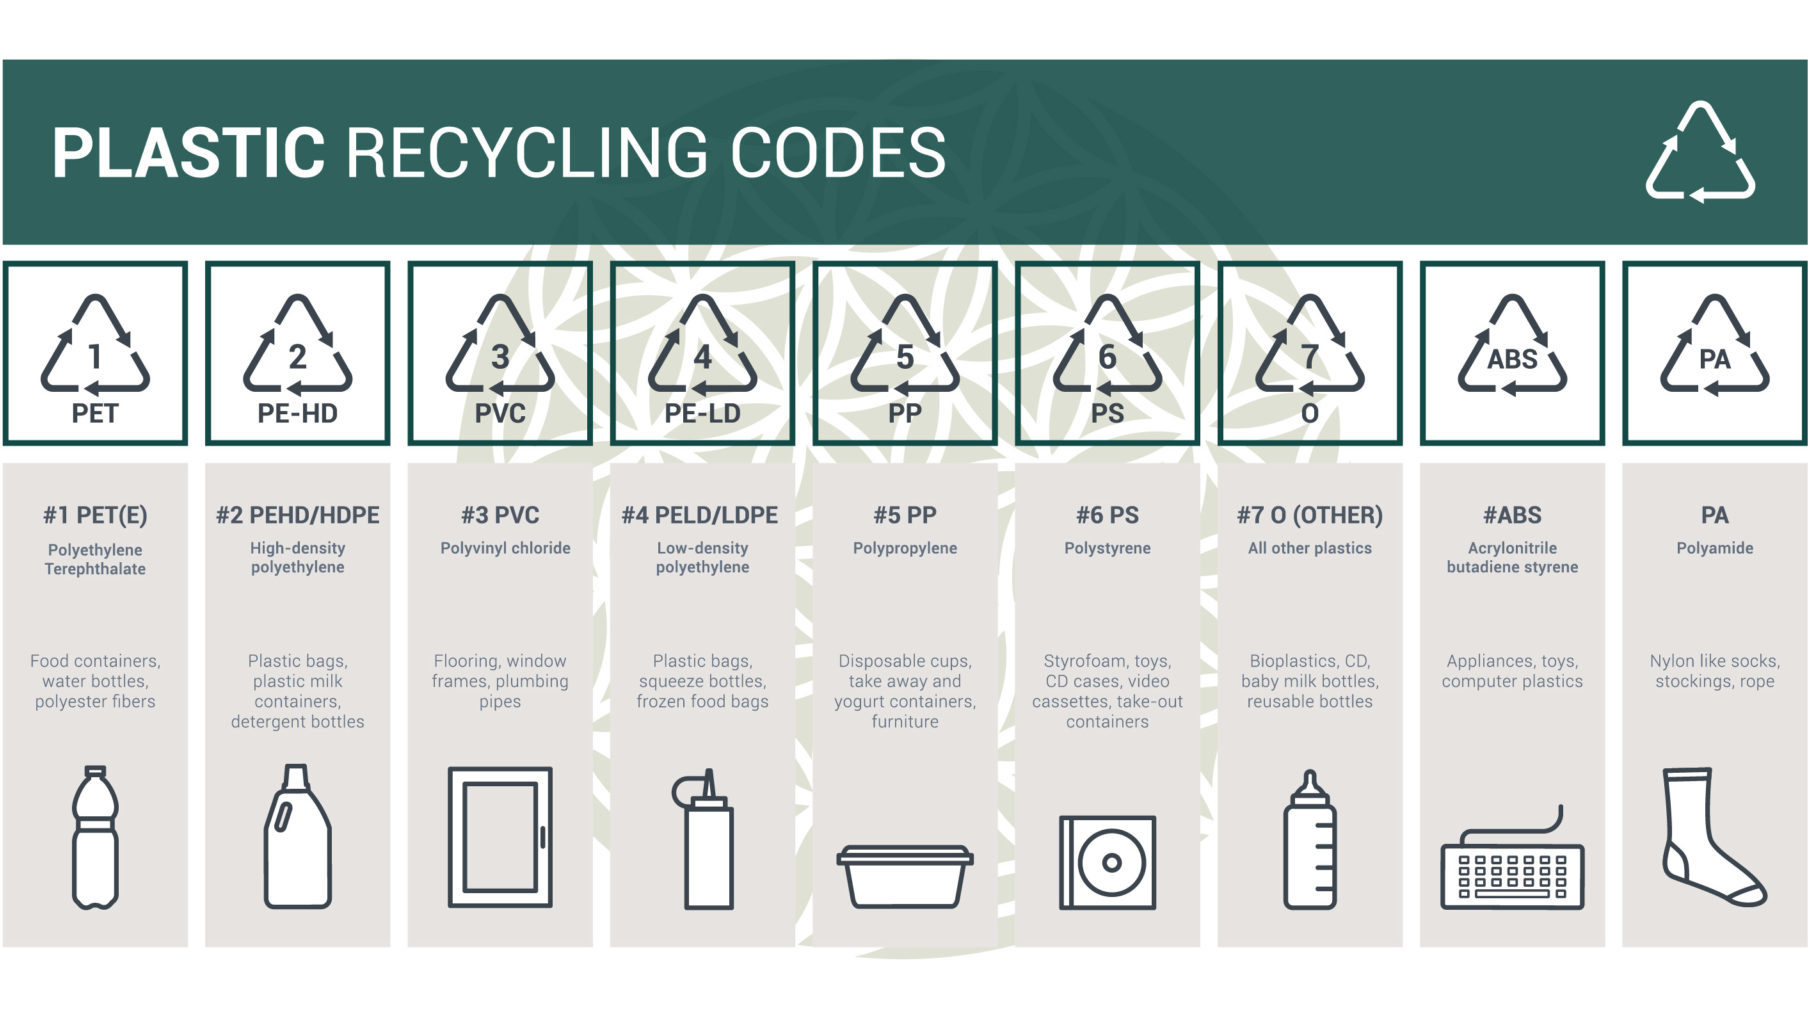 Plastic Recycling Codes - The Deadly Impact of Plastic on the Planet - Part 1